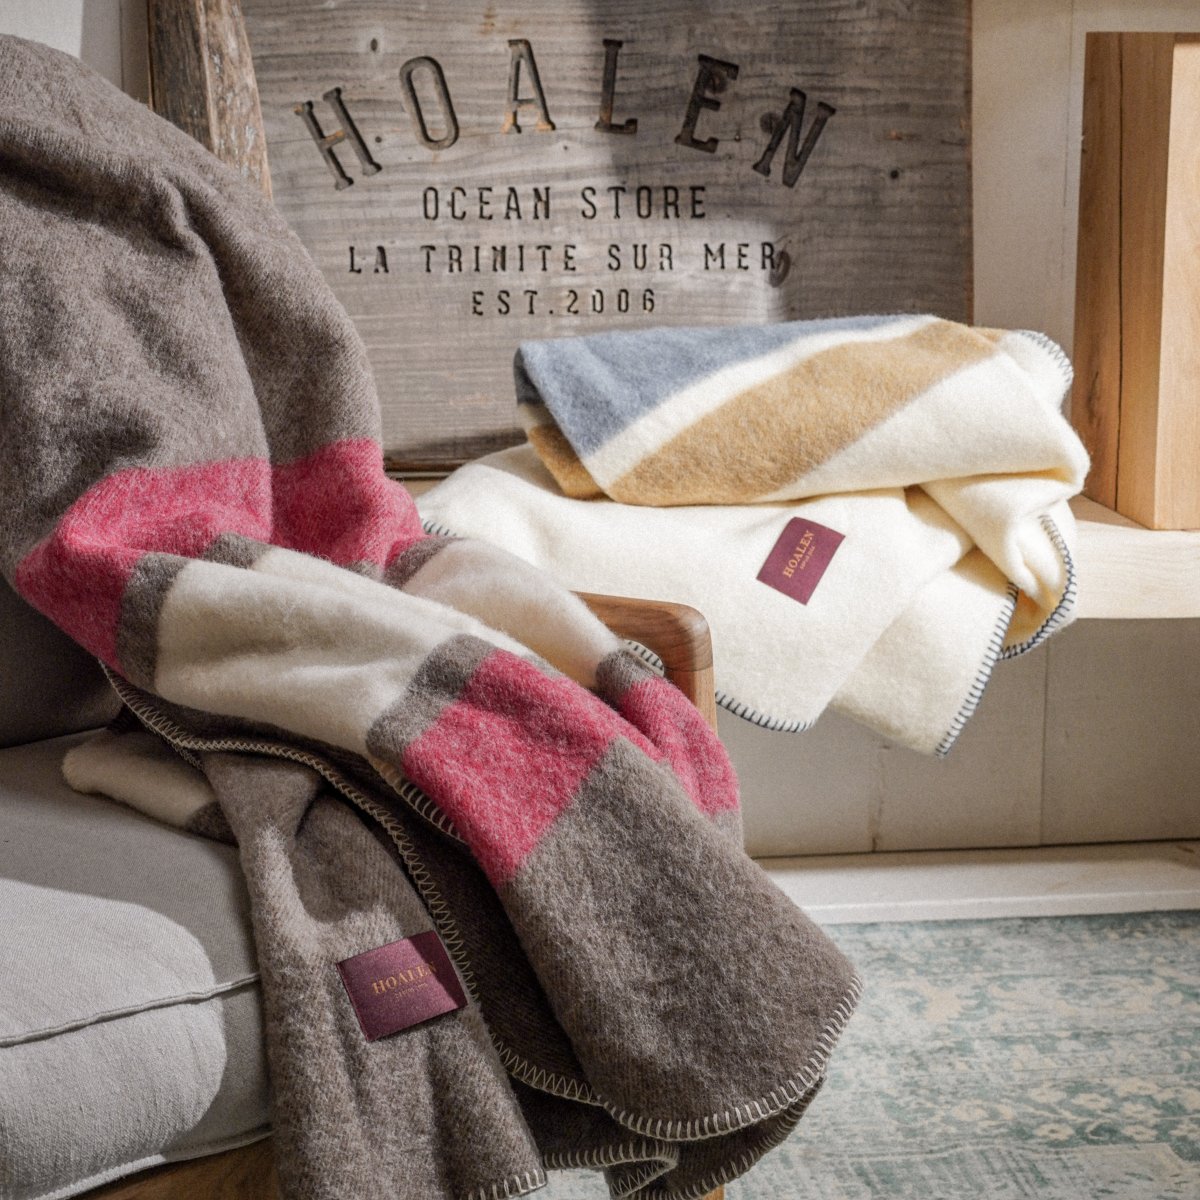 This blanket is made in France by a renowned manufacturer that began in the very early 19th century and is recognized today as a "Entreprise du Patrimoine Vivant".